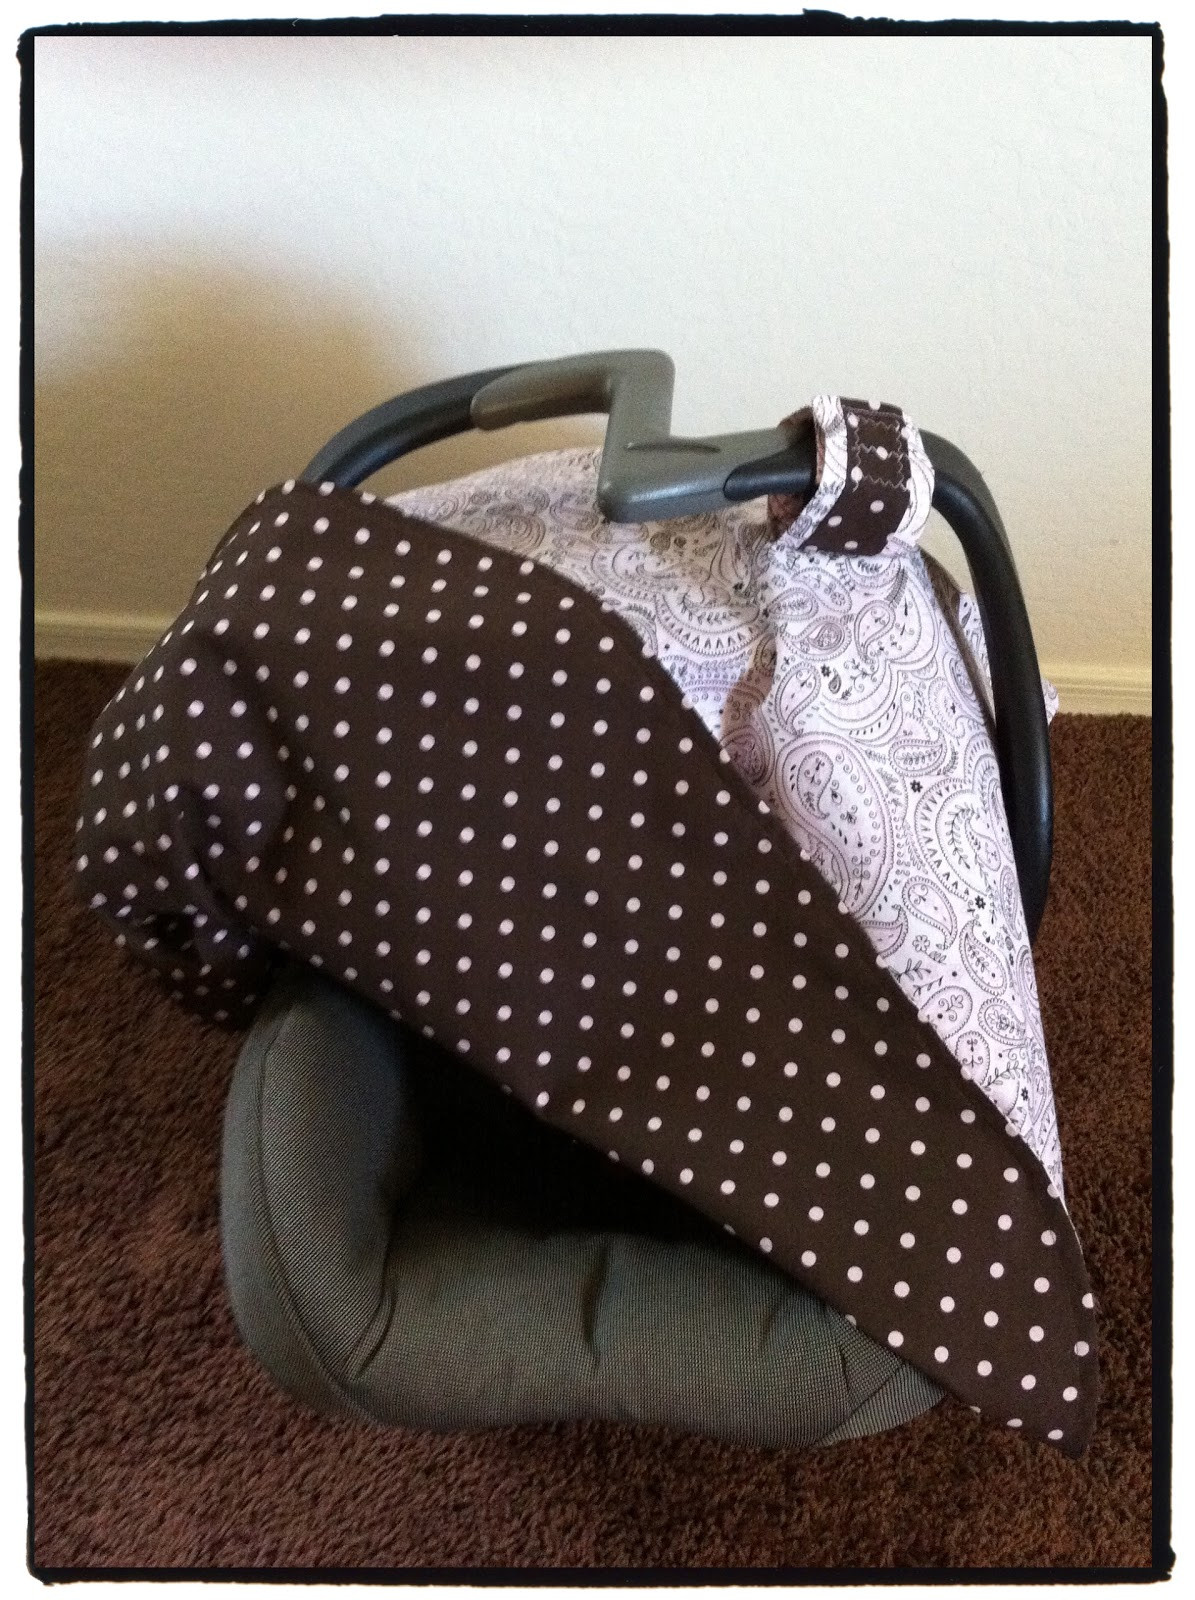 DIY Baby Car Seat Cover
 Mo Momma Sewing DIY Car Seat Cover Canopy Tutorial